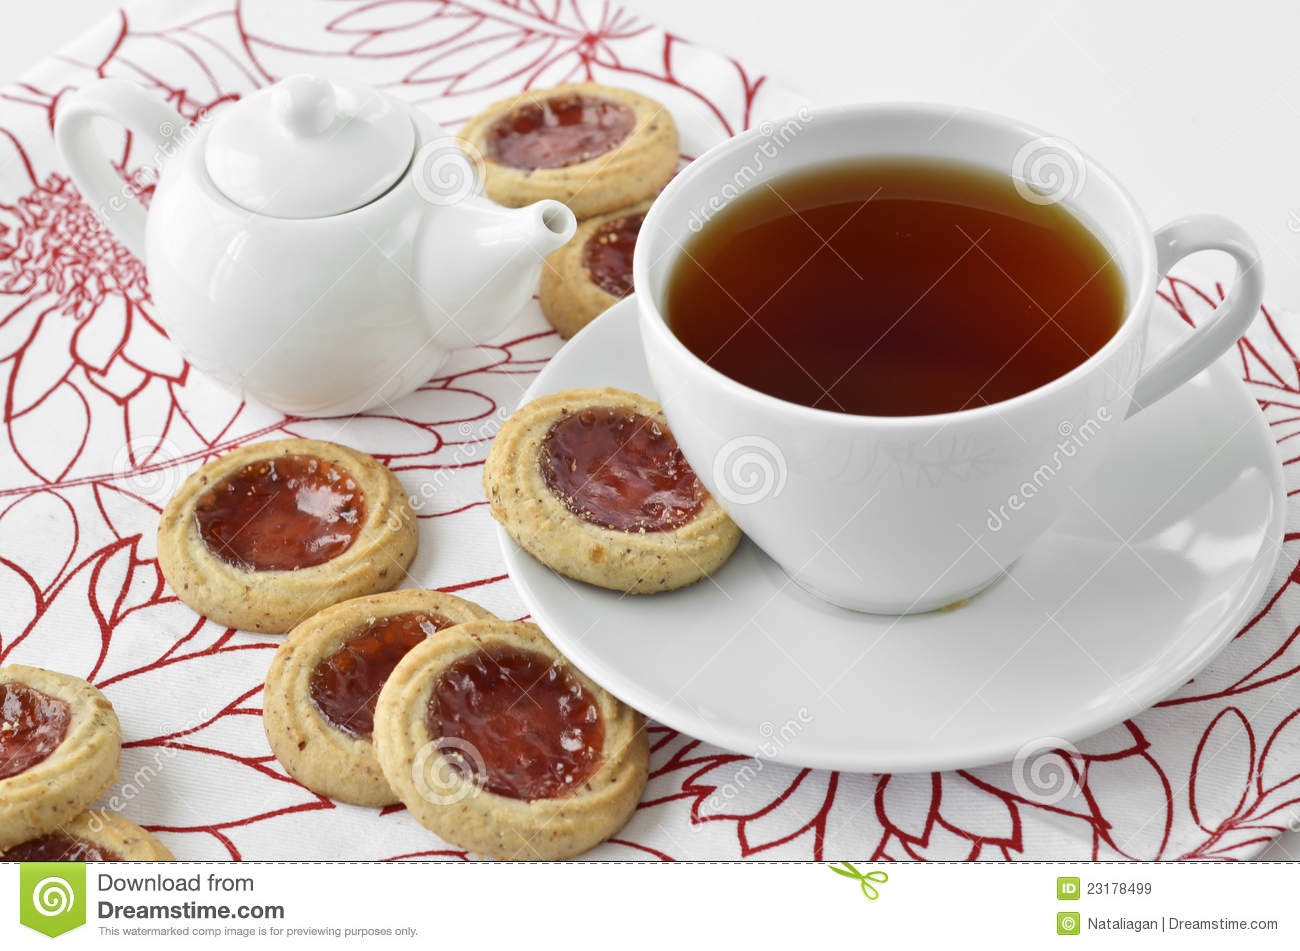 Tea And Cookies Royalty Free Stock Images   Image  23178499